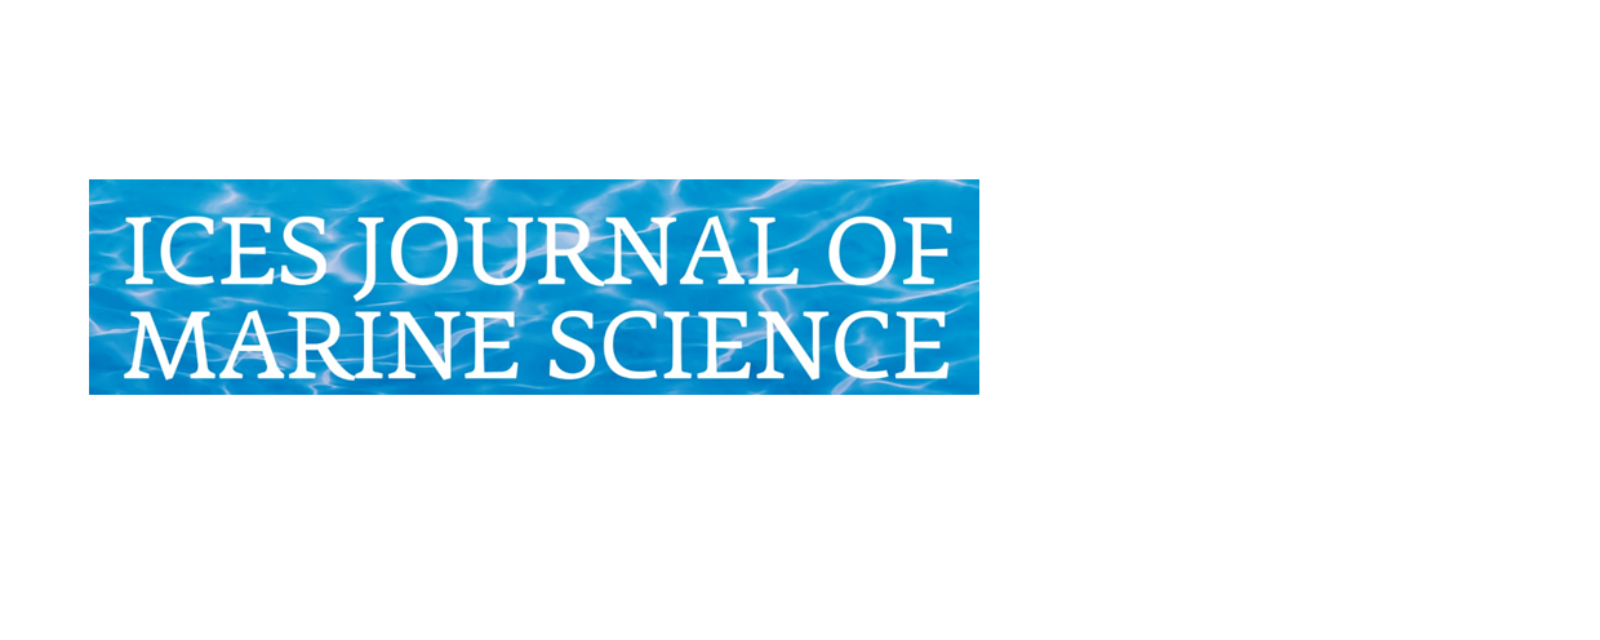 ICES Journal of Marine Science 1